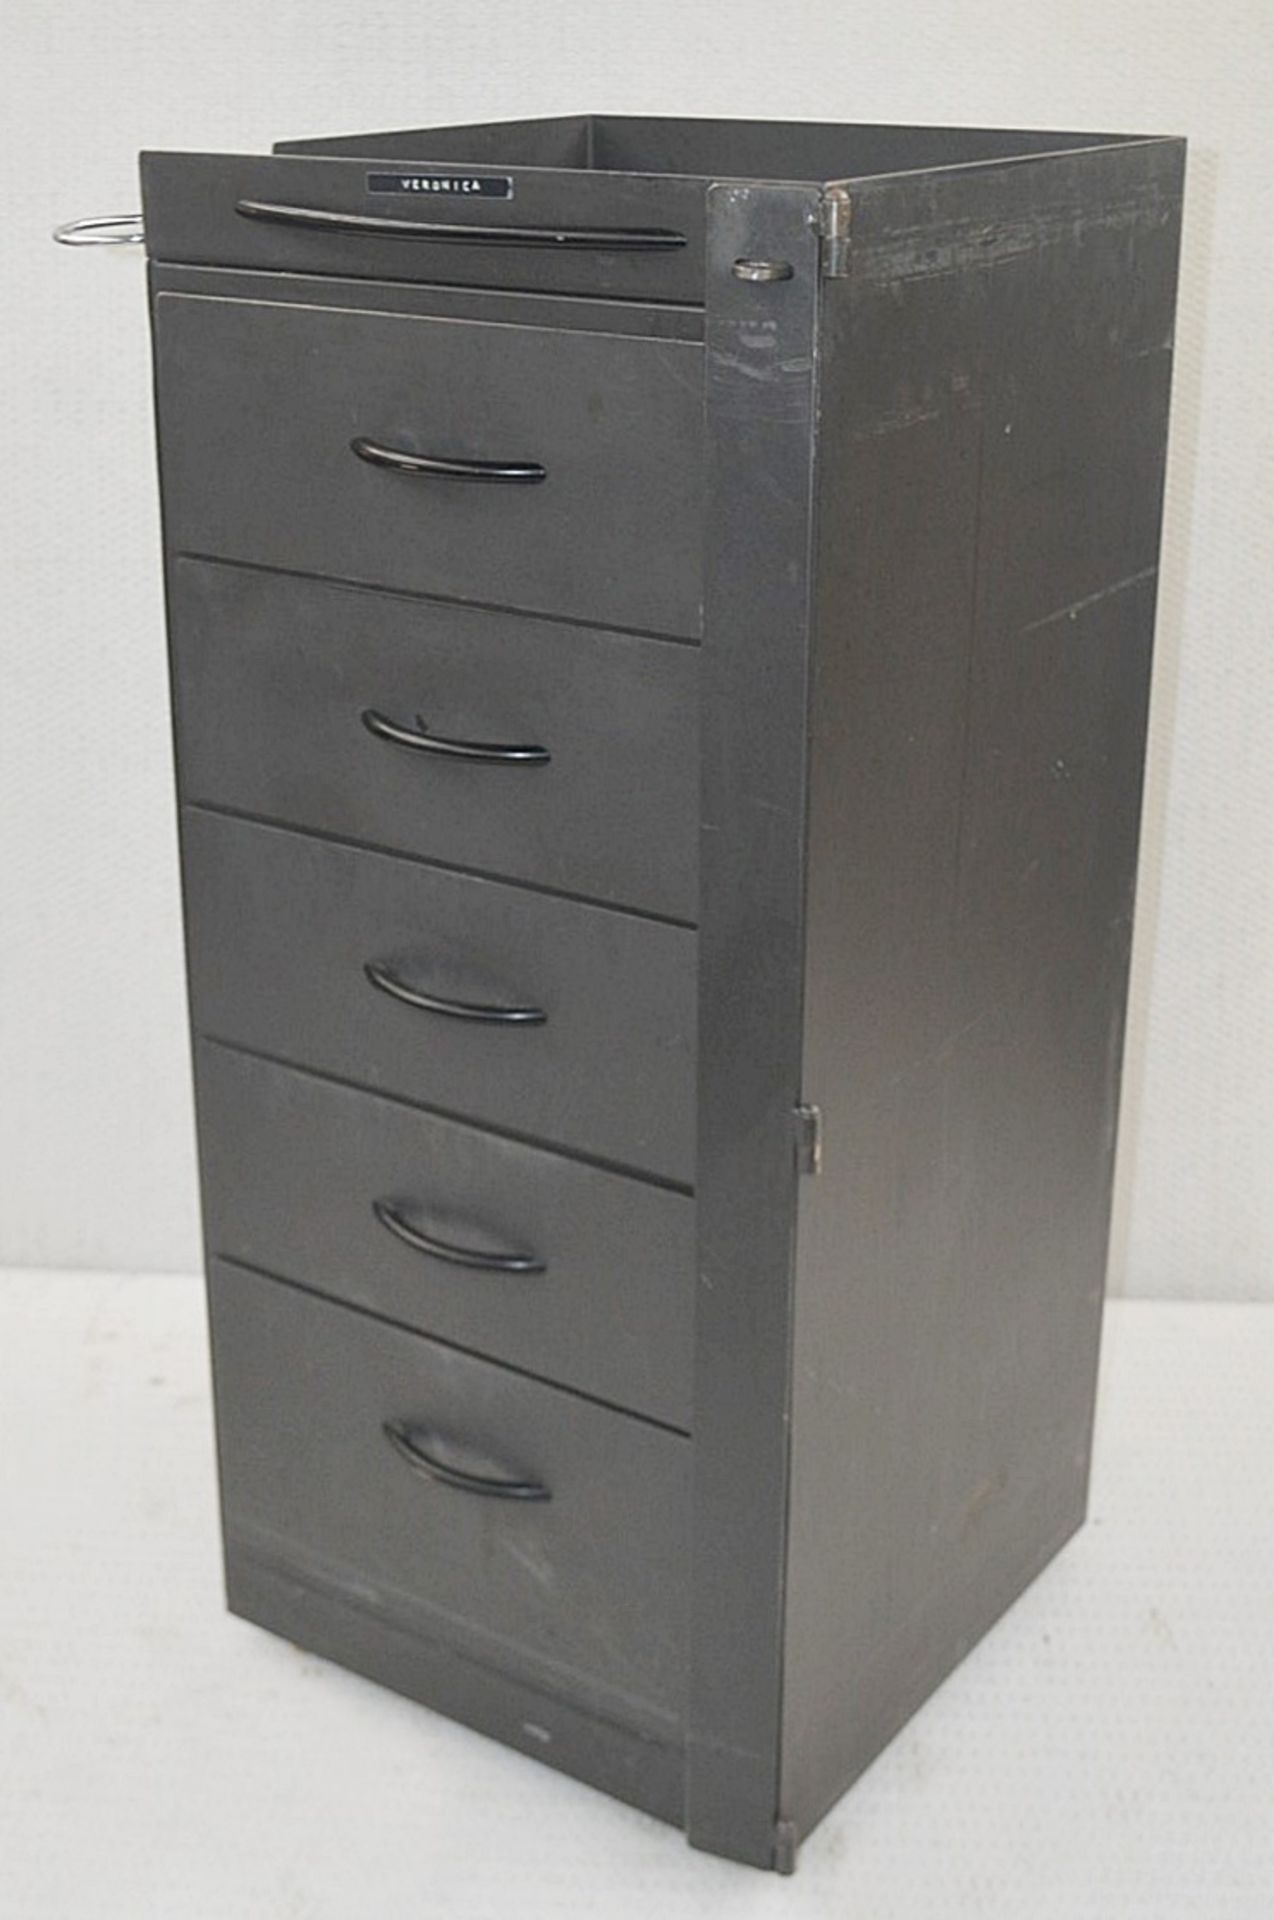 4 x Metal Hair Salon Styling Station Cabinets - Each Features 5-Drawers, Lock Bar & Holder - Image 3 of 10